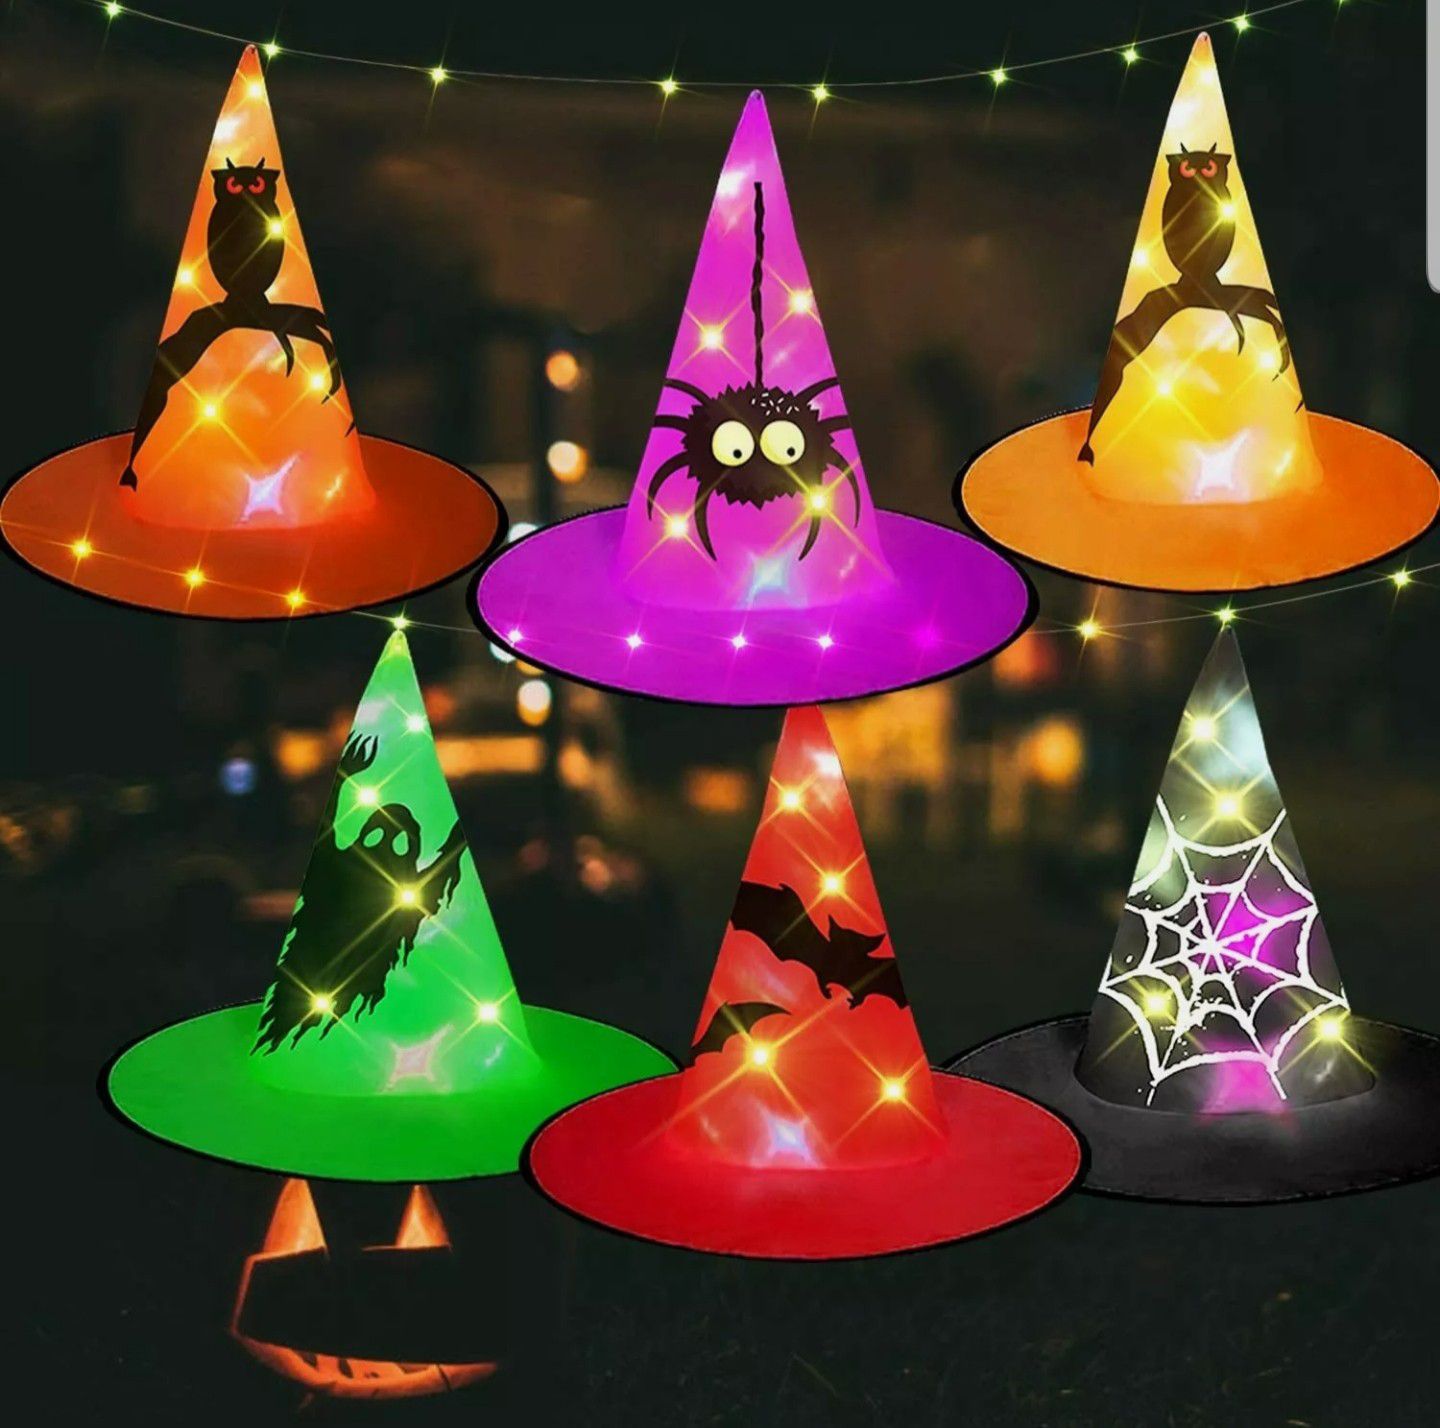 HIGBRE Halloween Decorations Witch Hats, 6Pcs Hanging Lighted Witch Hat Outdoor